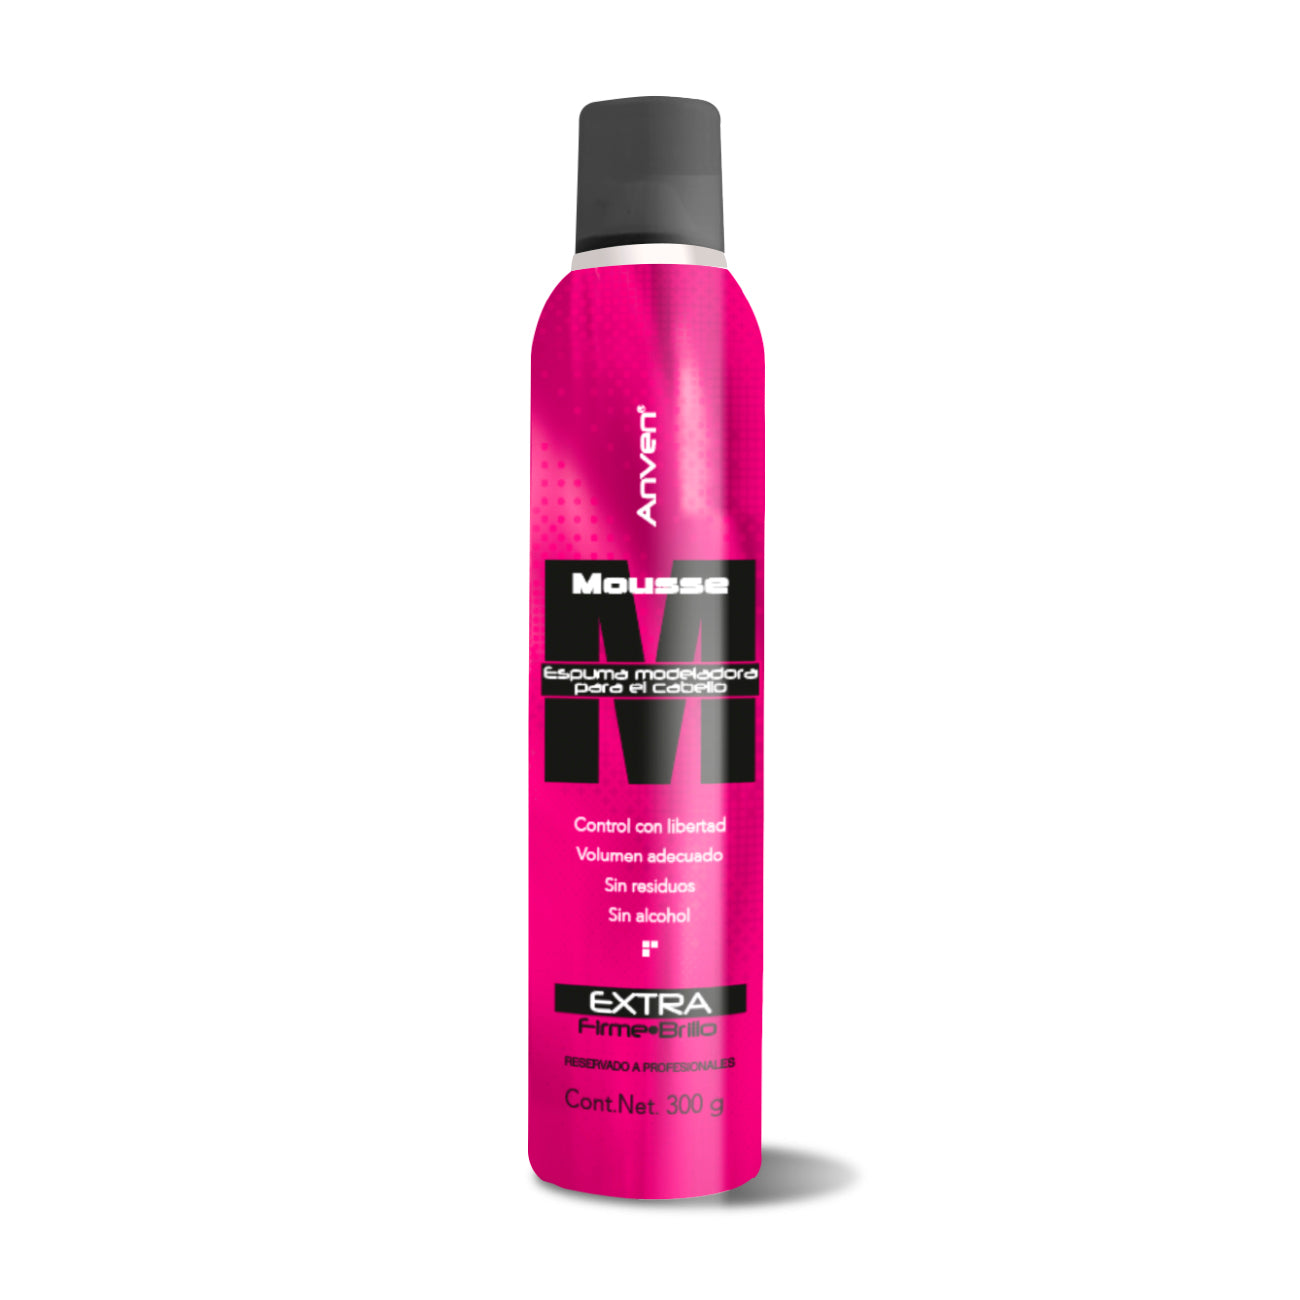 ANVEN MOUSSE EXTRA FIRME 300 g